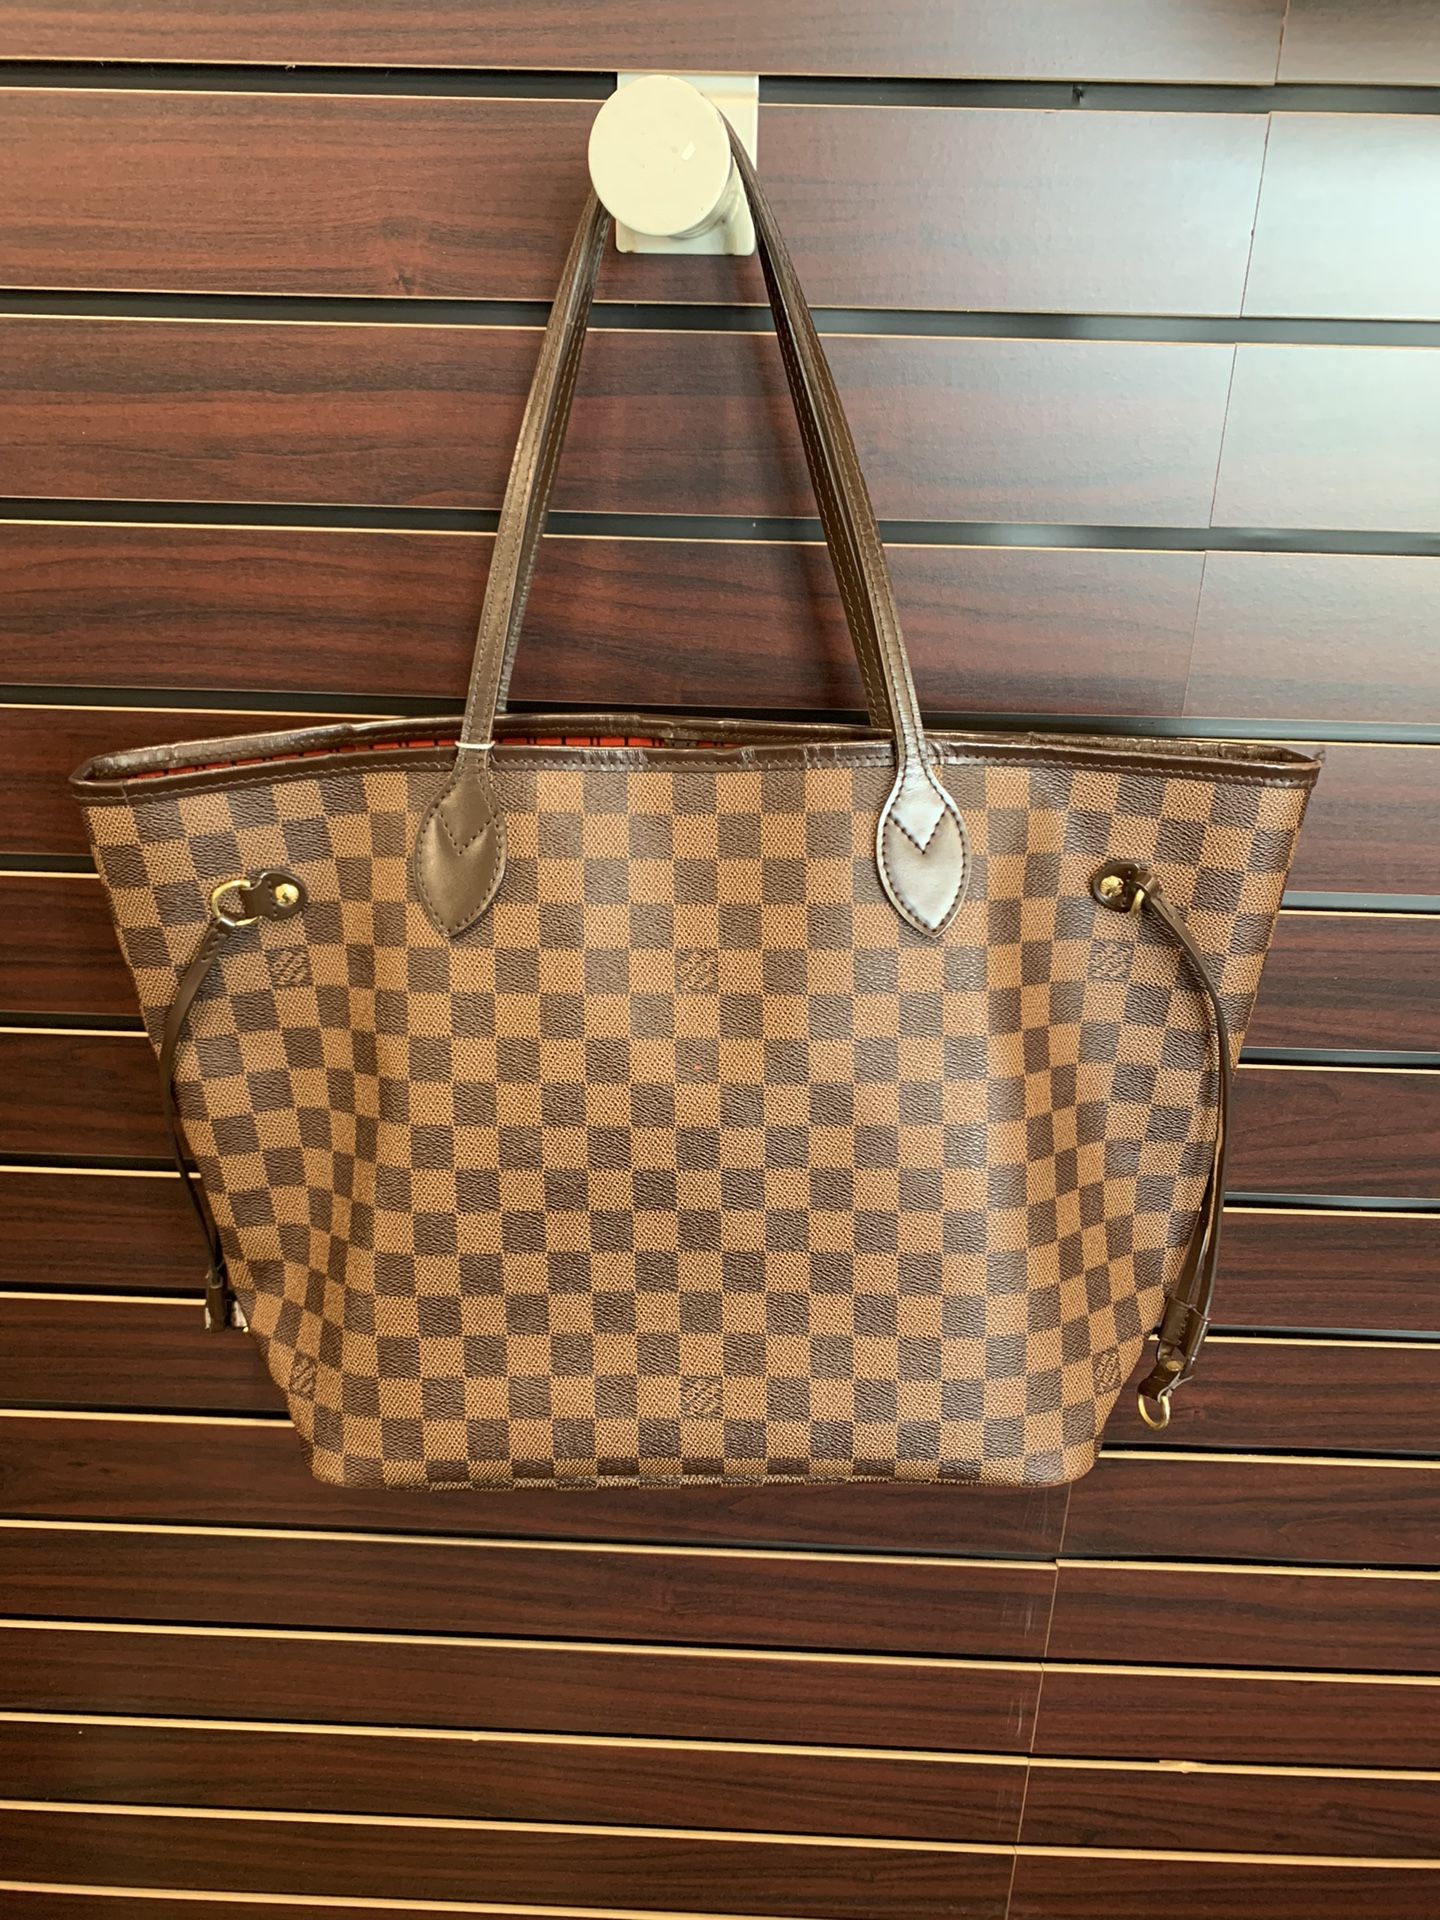 Louis Vuitton Tote Bag for Sale in Southgate, MI - OfferUp